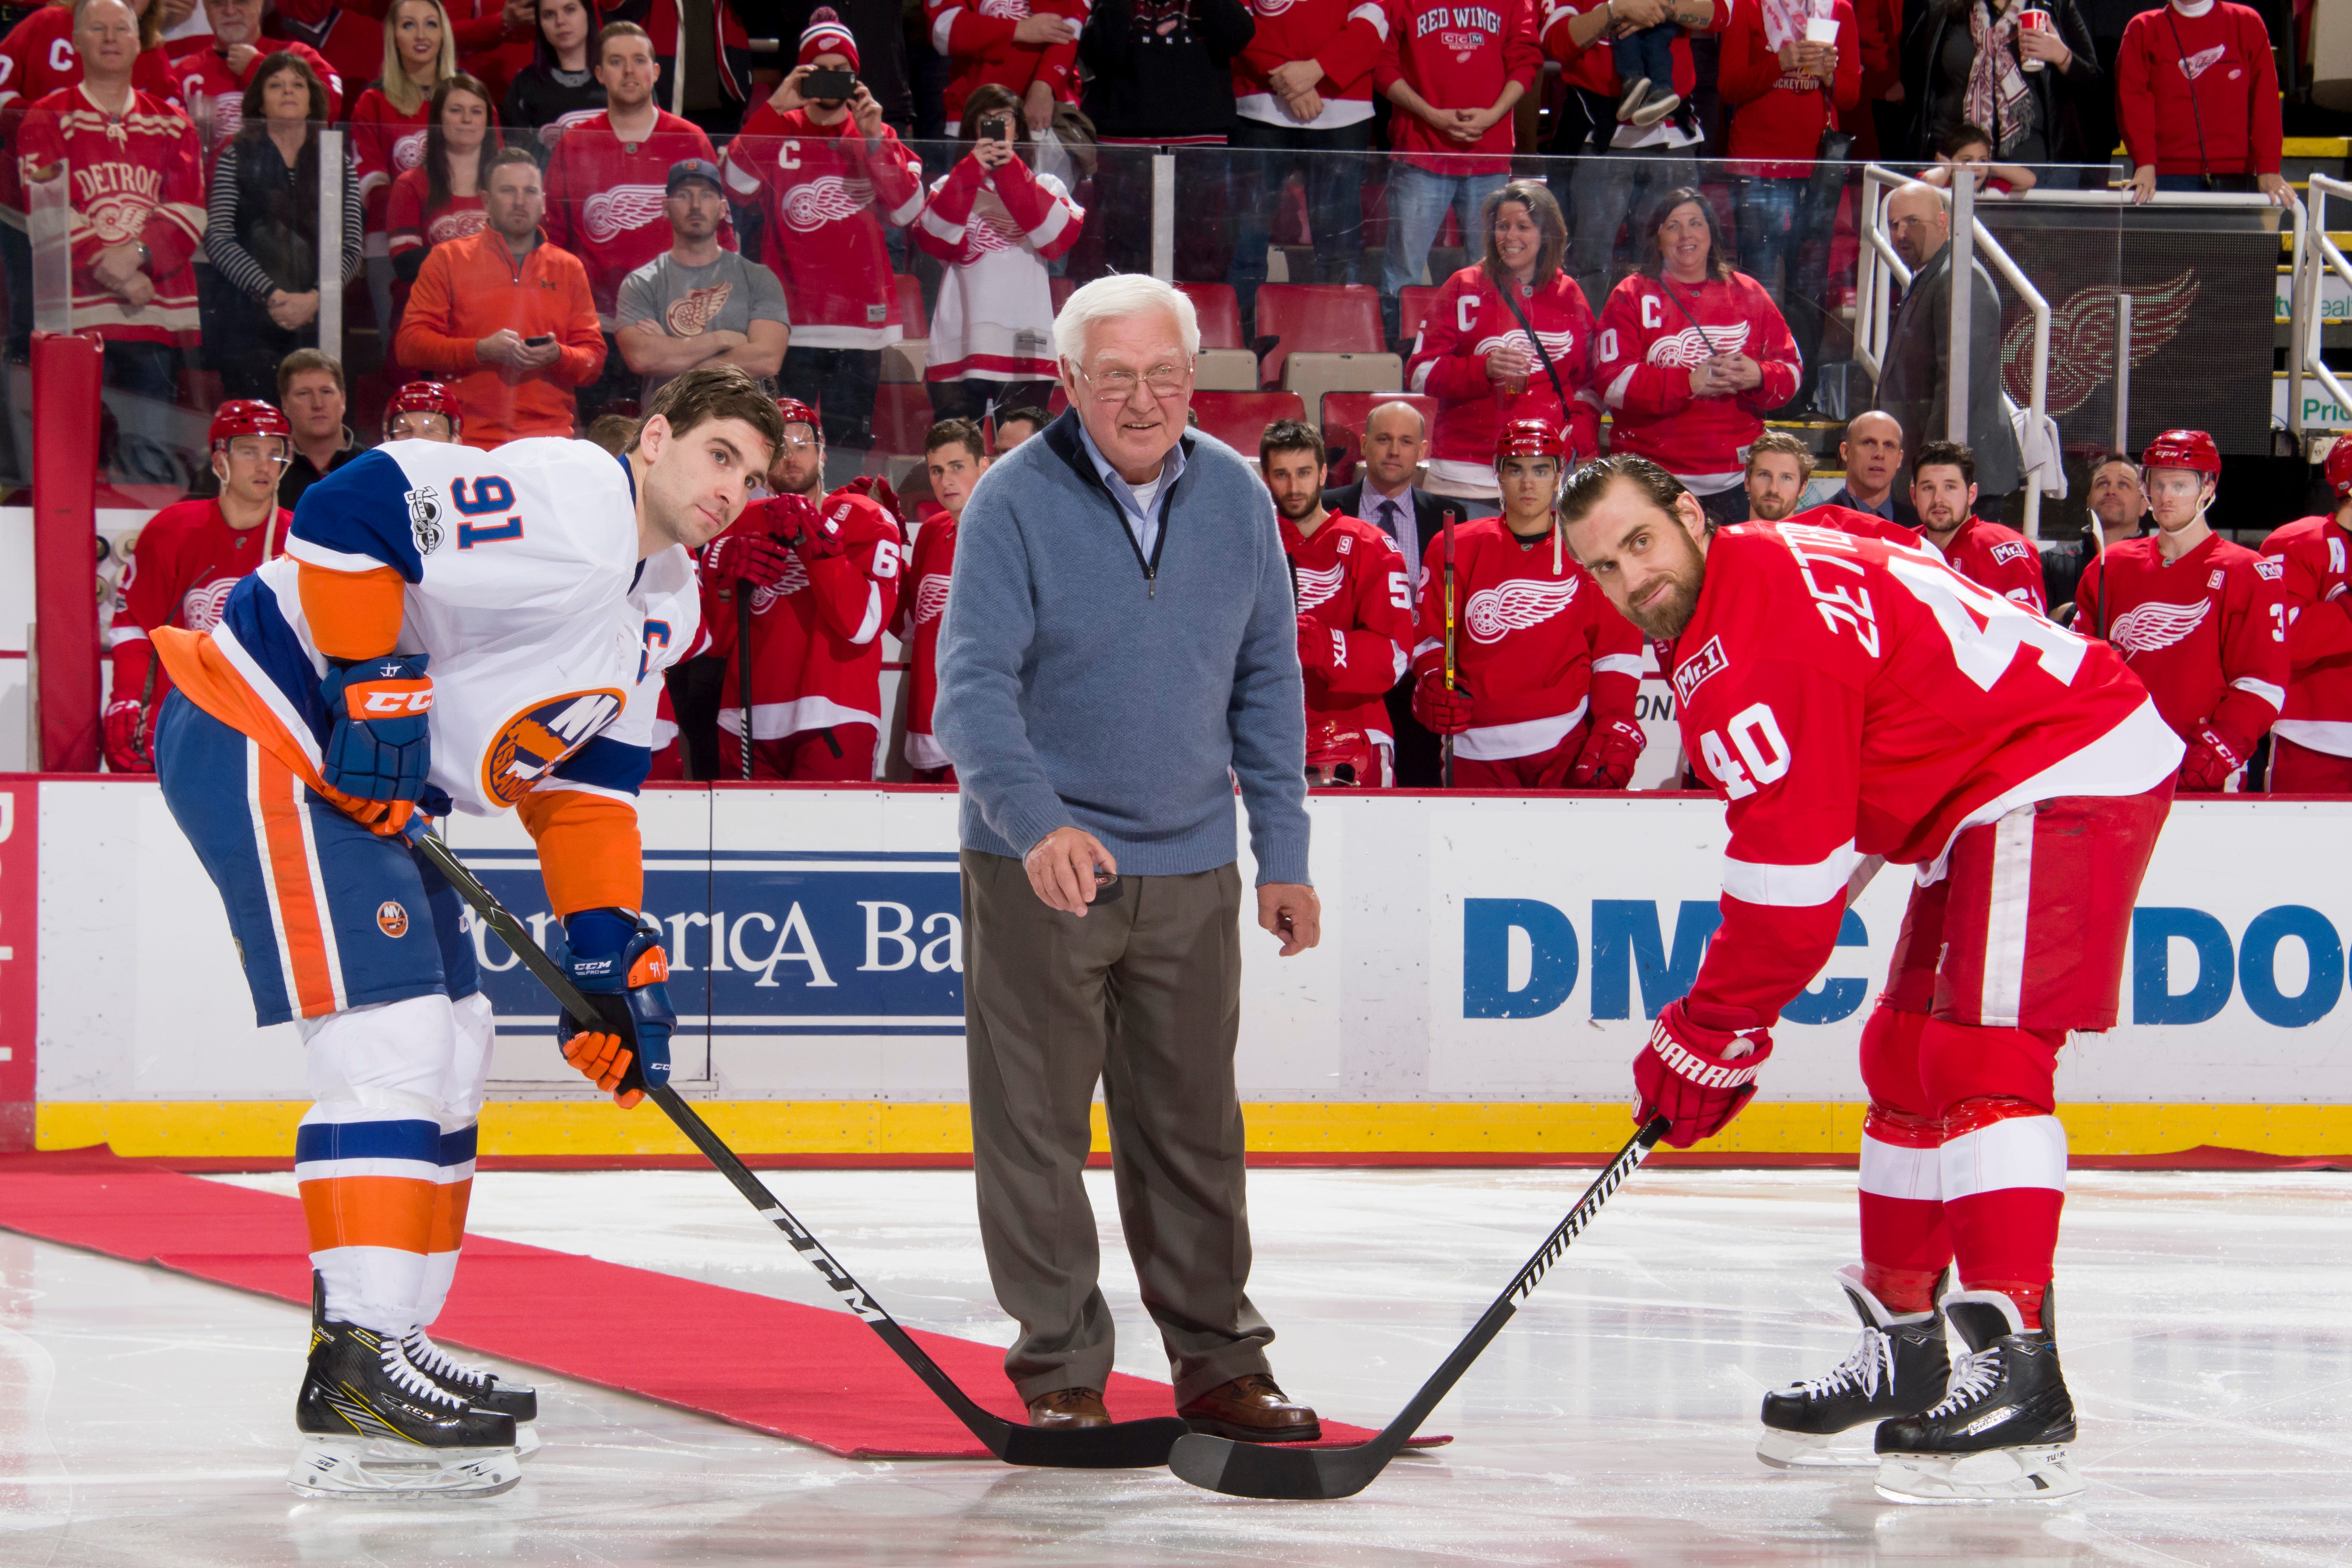 Red Wings Hall of Fame Alex Delvecchio participates in a ceremonial puck drop with New York center John Tavares and Detroit left wing Henrik Zetterberg before the start of the game Feb. 21, 2017.